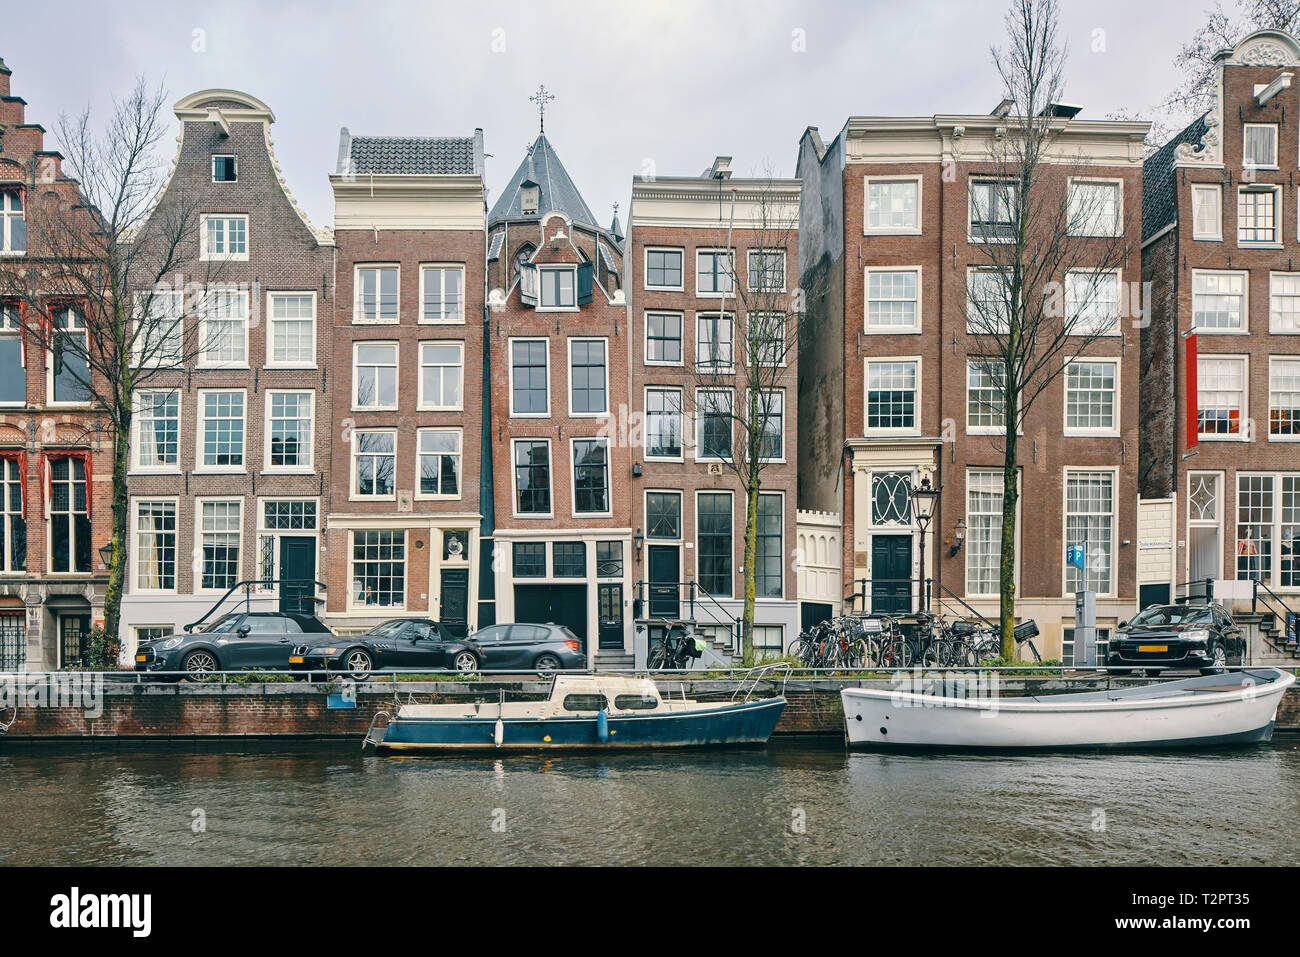 Multistorey office and residential buildings along canal, Amsterdam, Noord-Holland, Netherlands Stock Photo